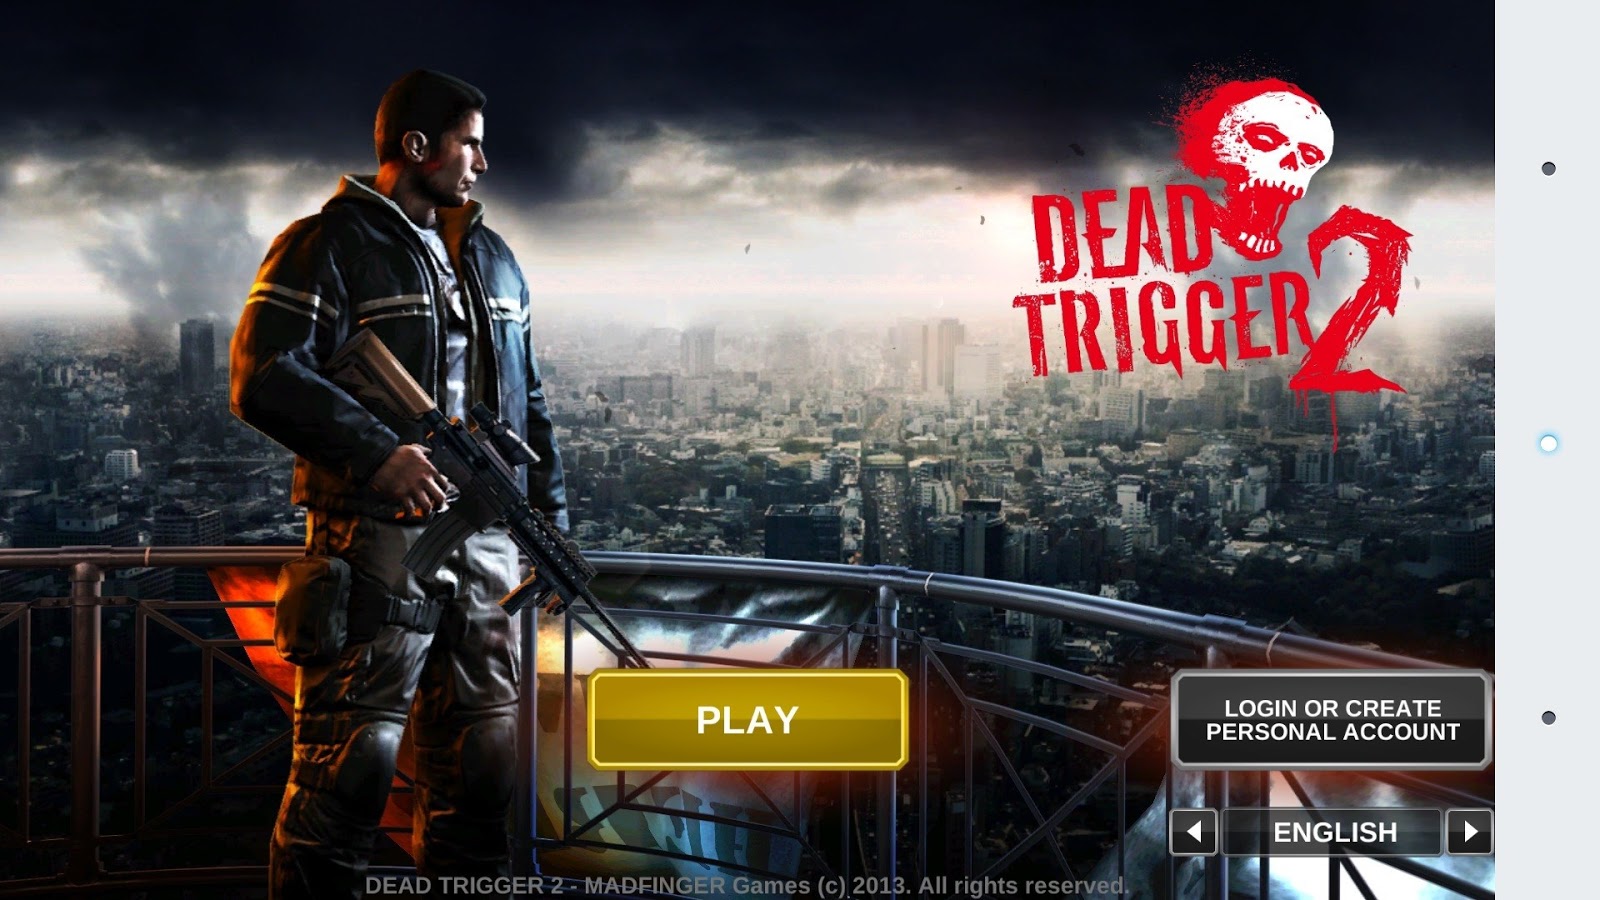 dead trigger 2 mod apk 1.6.3 unlimited money and gold